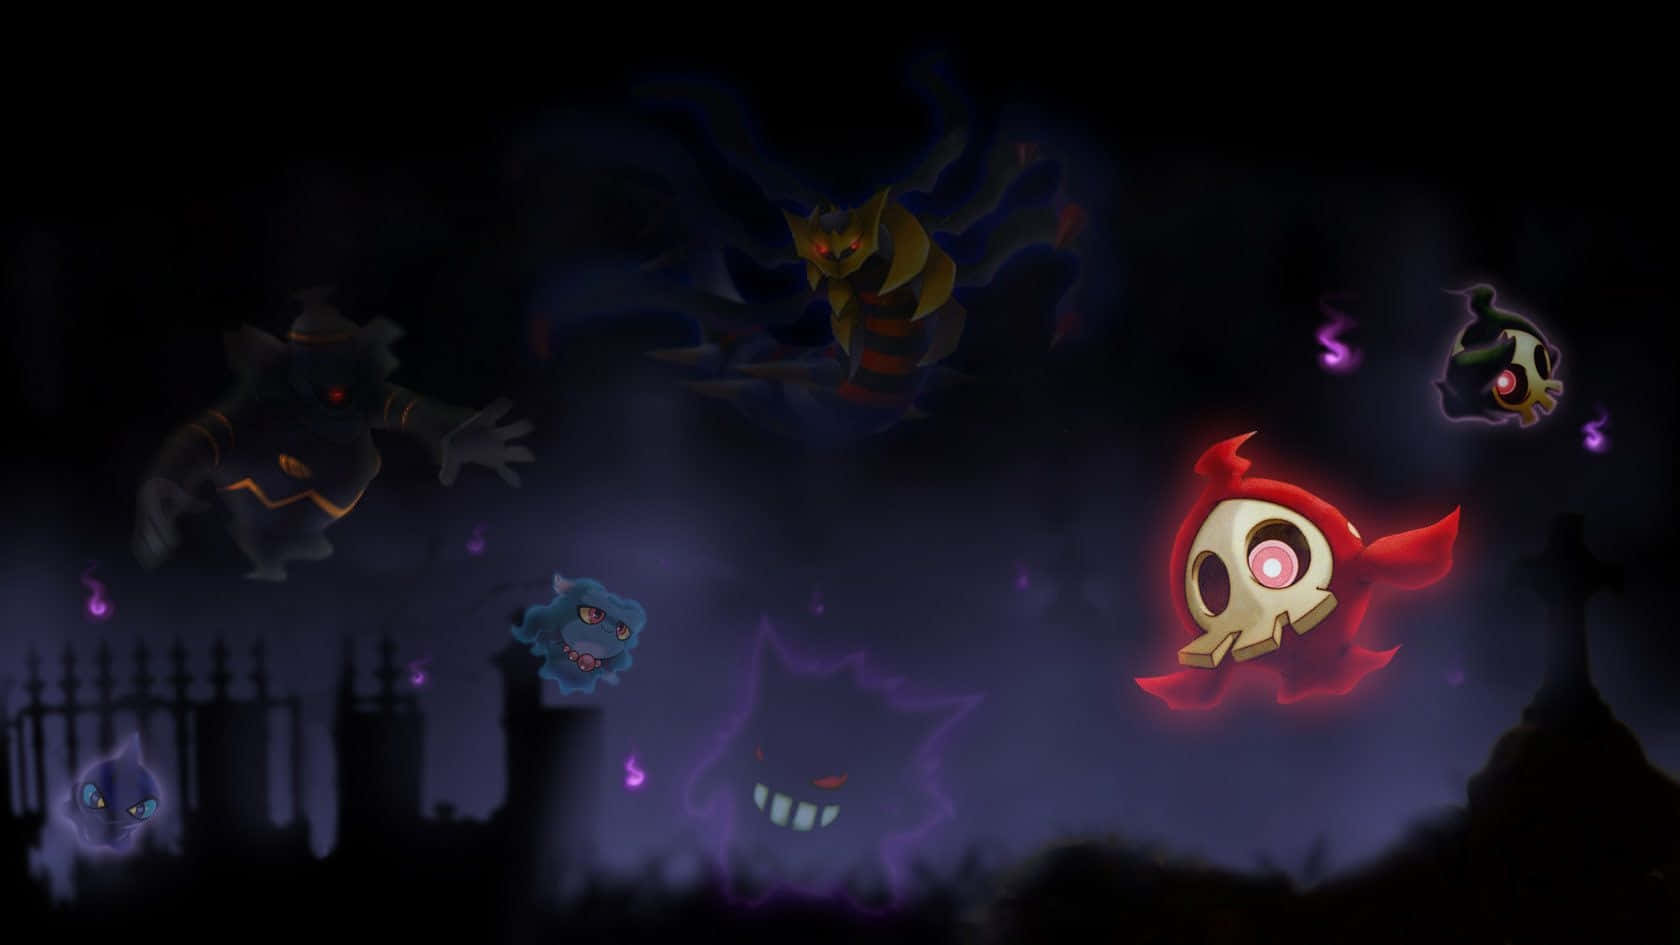 Eerie Encounter with Ghost Pokémon Wallpaper